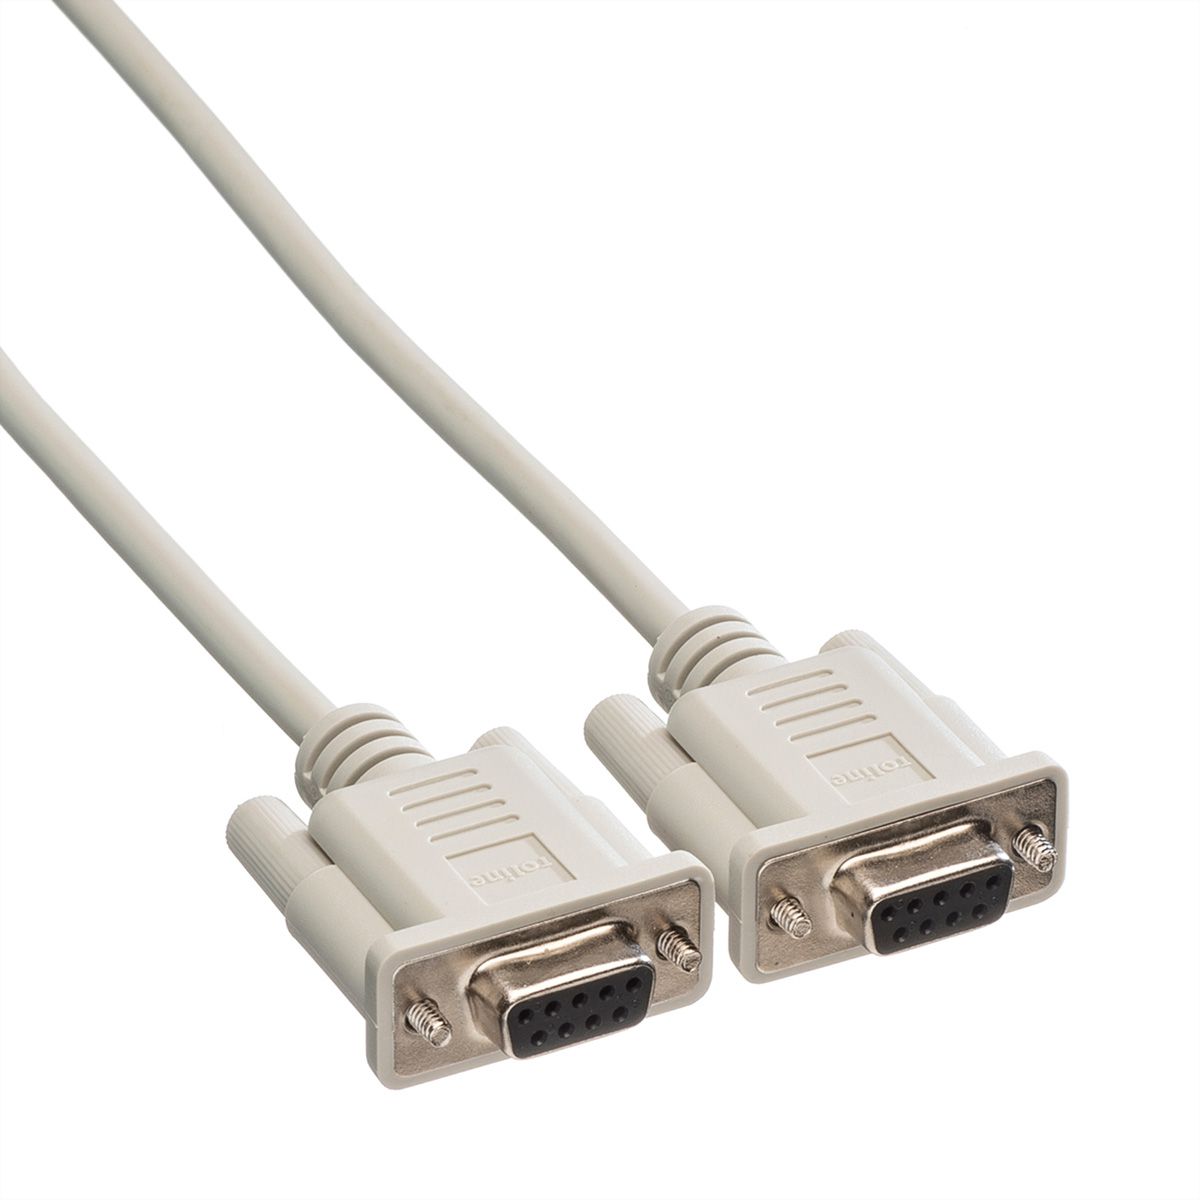 ROLINE Serial Link Cable, DB9 F/F, 1.8 m - SECOMP International AG